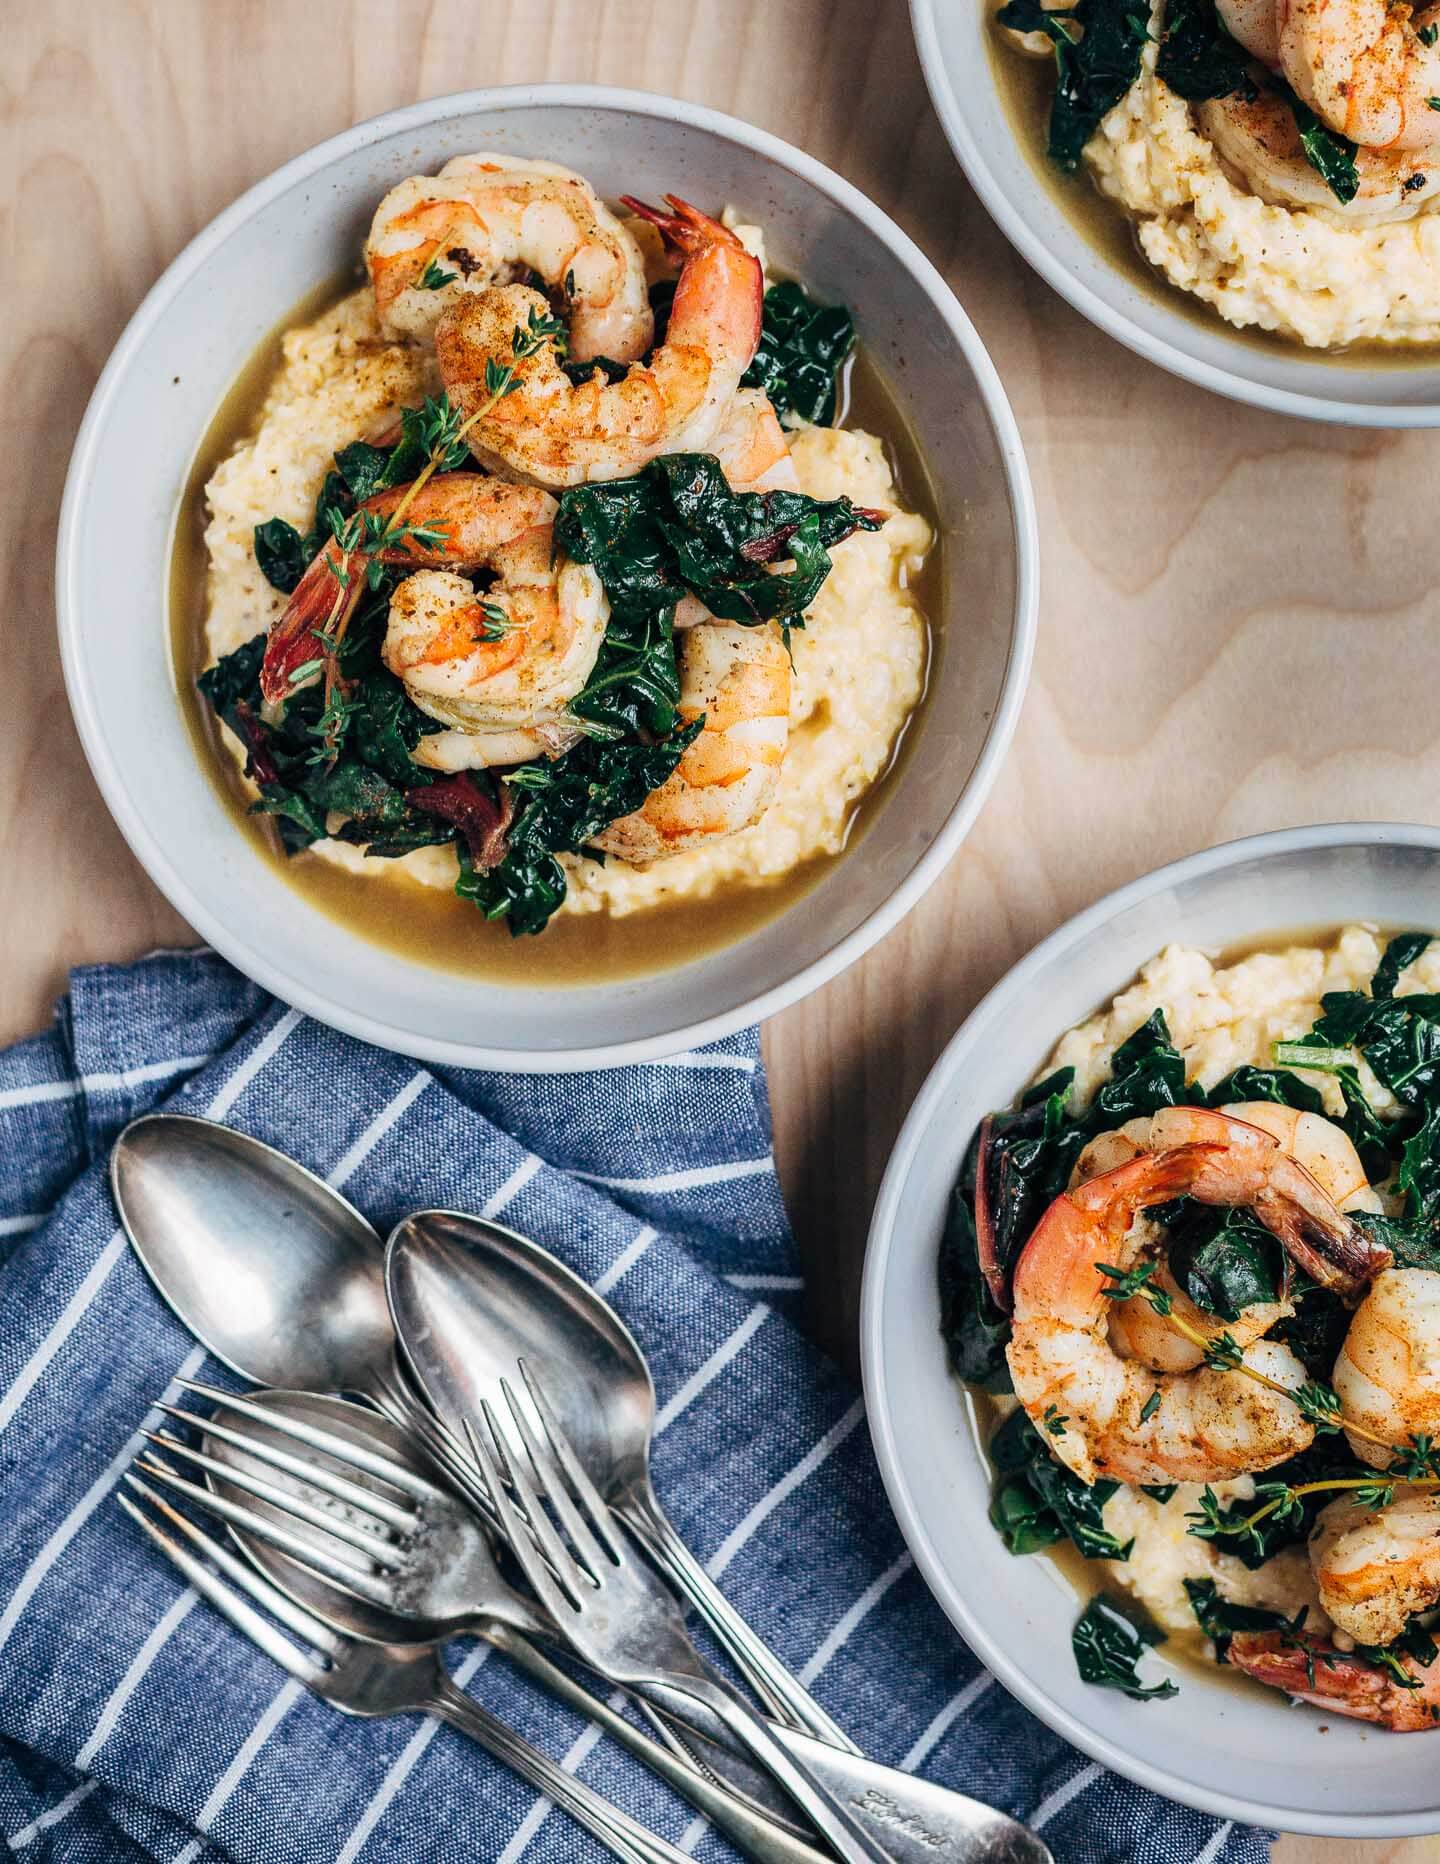 Add some leafy greens to your shrimp and grits! This recipe for shrimp and grits and greens features delicate shrimp with lots of depth, toothsome, buttery stone ground grits, and dark leafy greens cooked until tender in a lightly sweet, wonderfully garlicky shrimp broth.